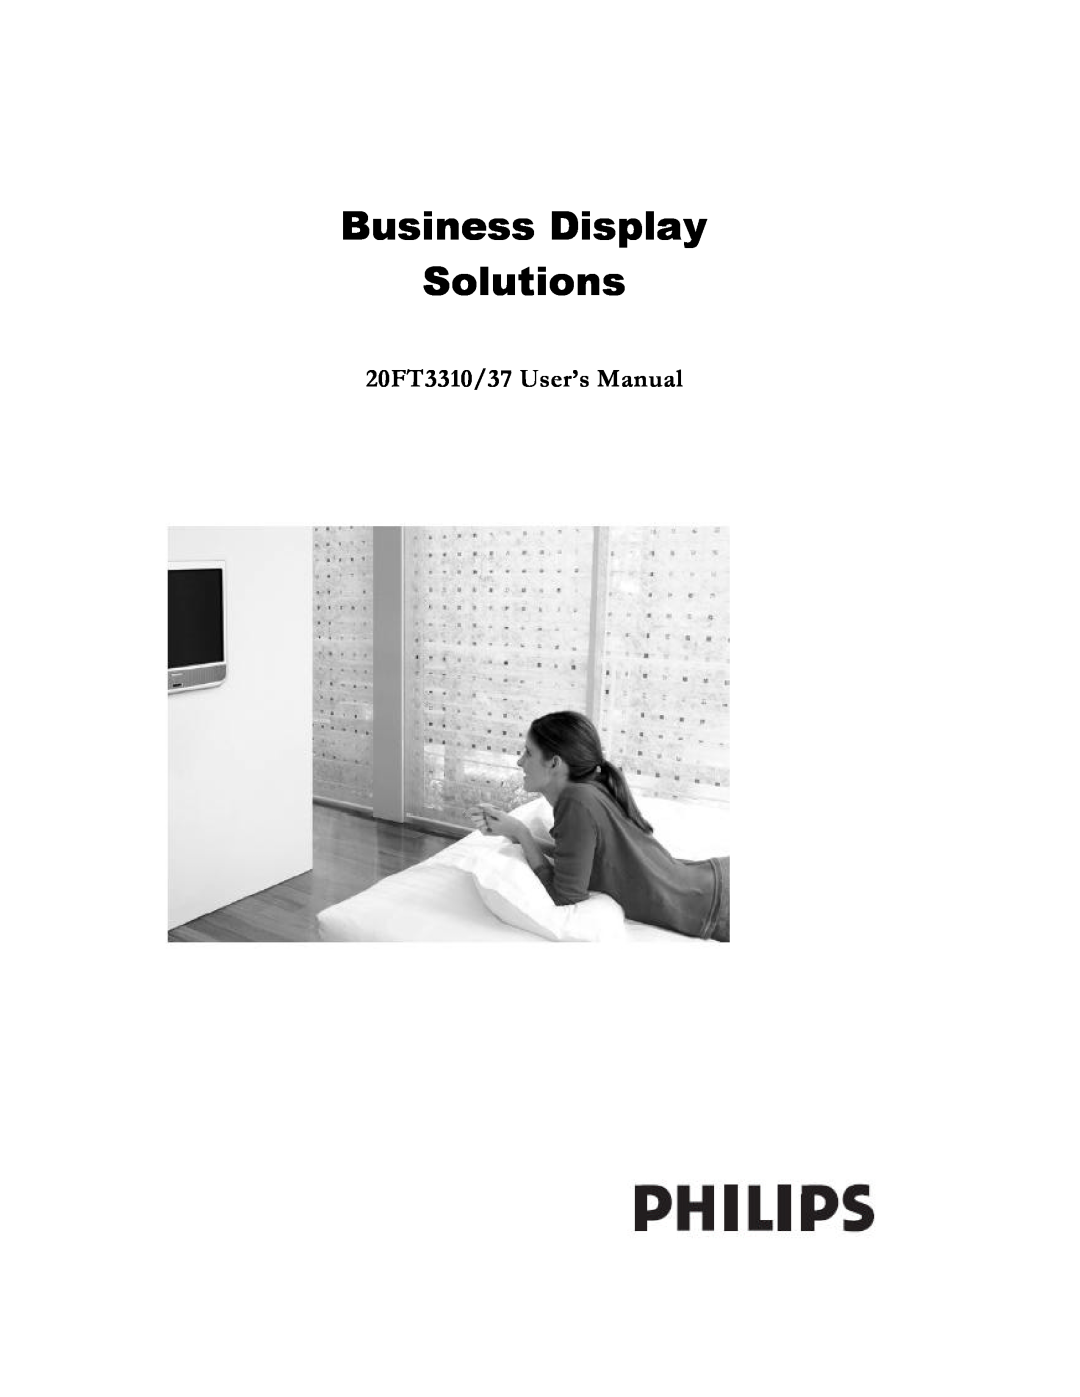 Philips user manual Business Display, Solutions, 20FT3310/37 User’s Manual 